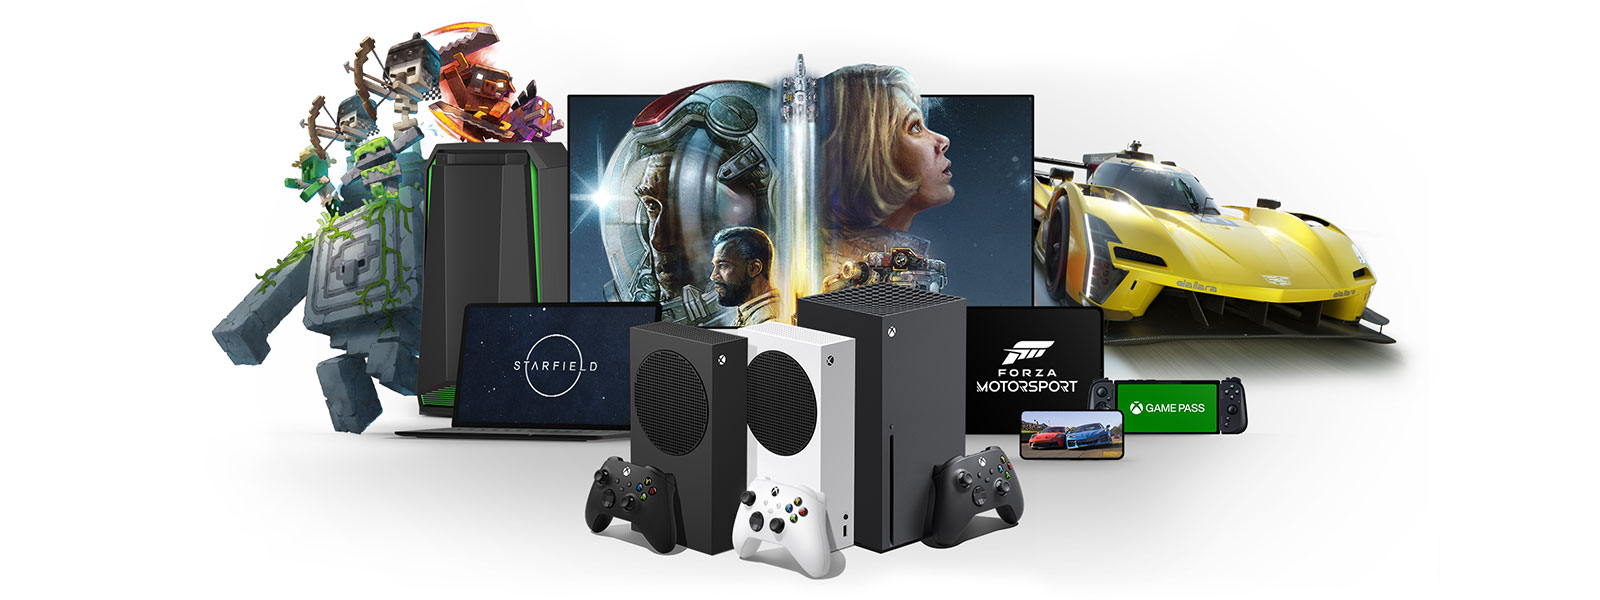 The Xbox Series family of consoles sit in front of a TV, laptop, tablet, and mobile devices featuring Starfield, Forza Motorsport, and Minecraft Dungeons.